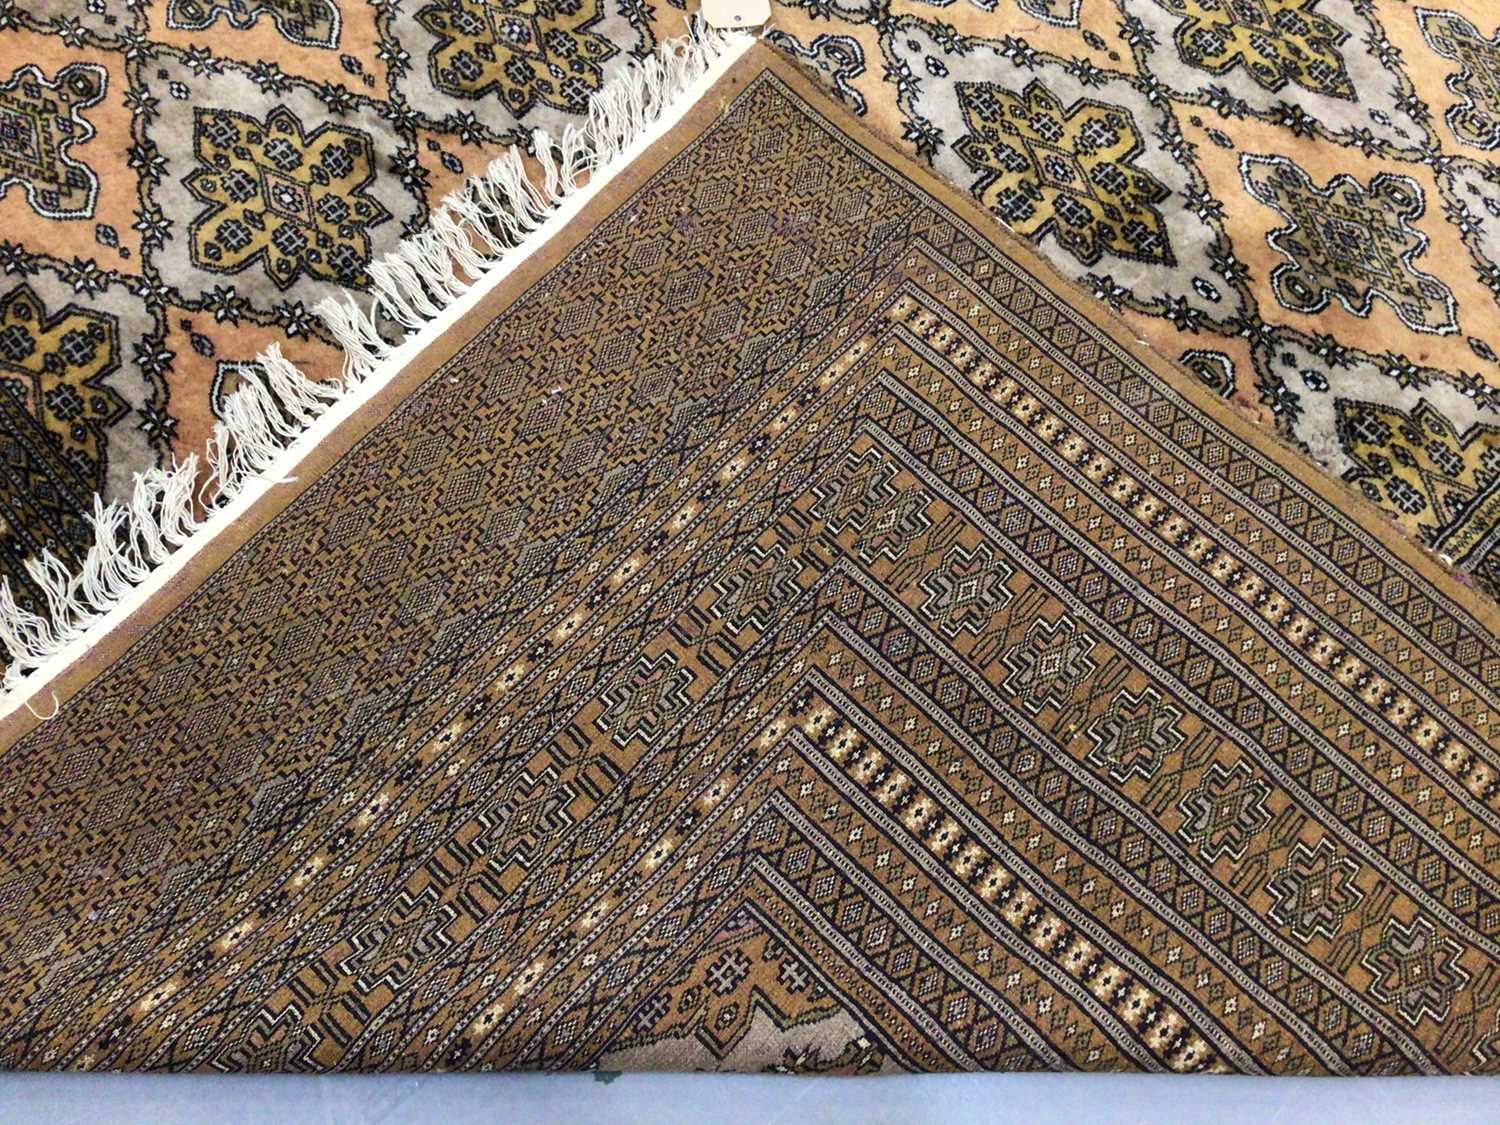 Large Pakistani carpet, purchased from Liberty's of London - Image 6 of 10